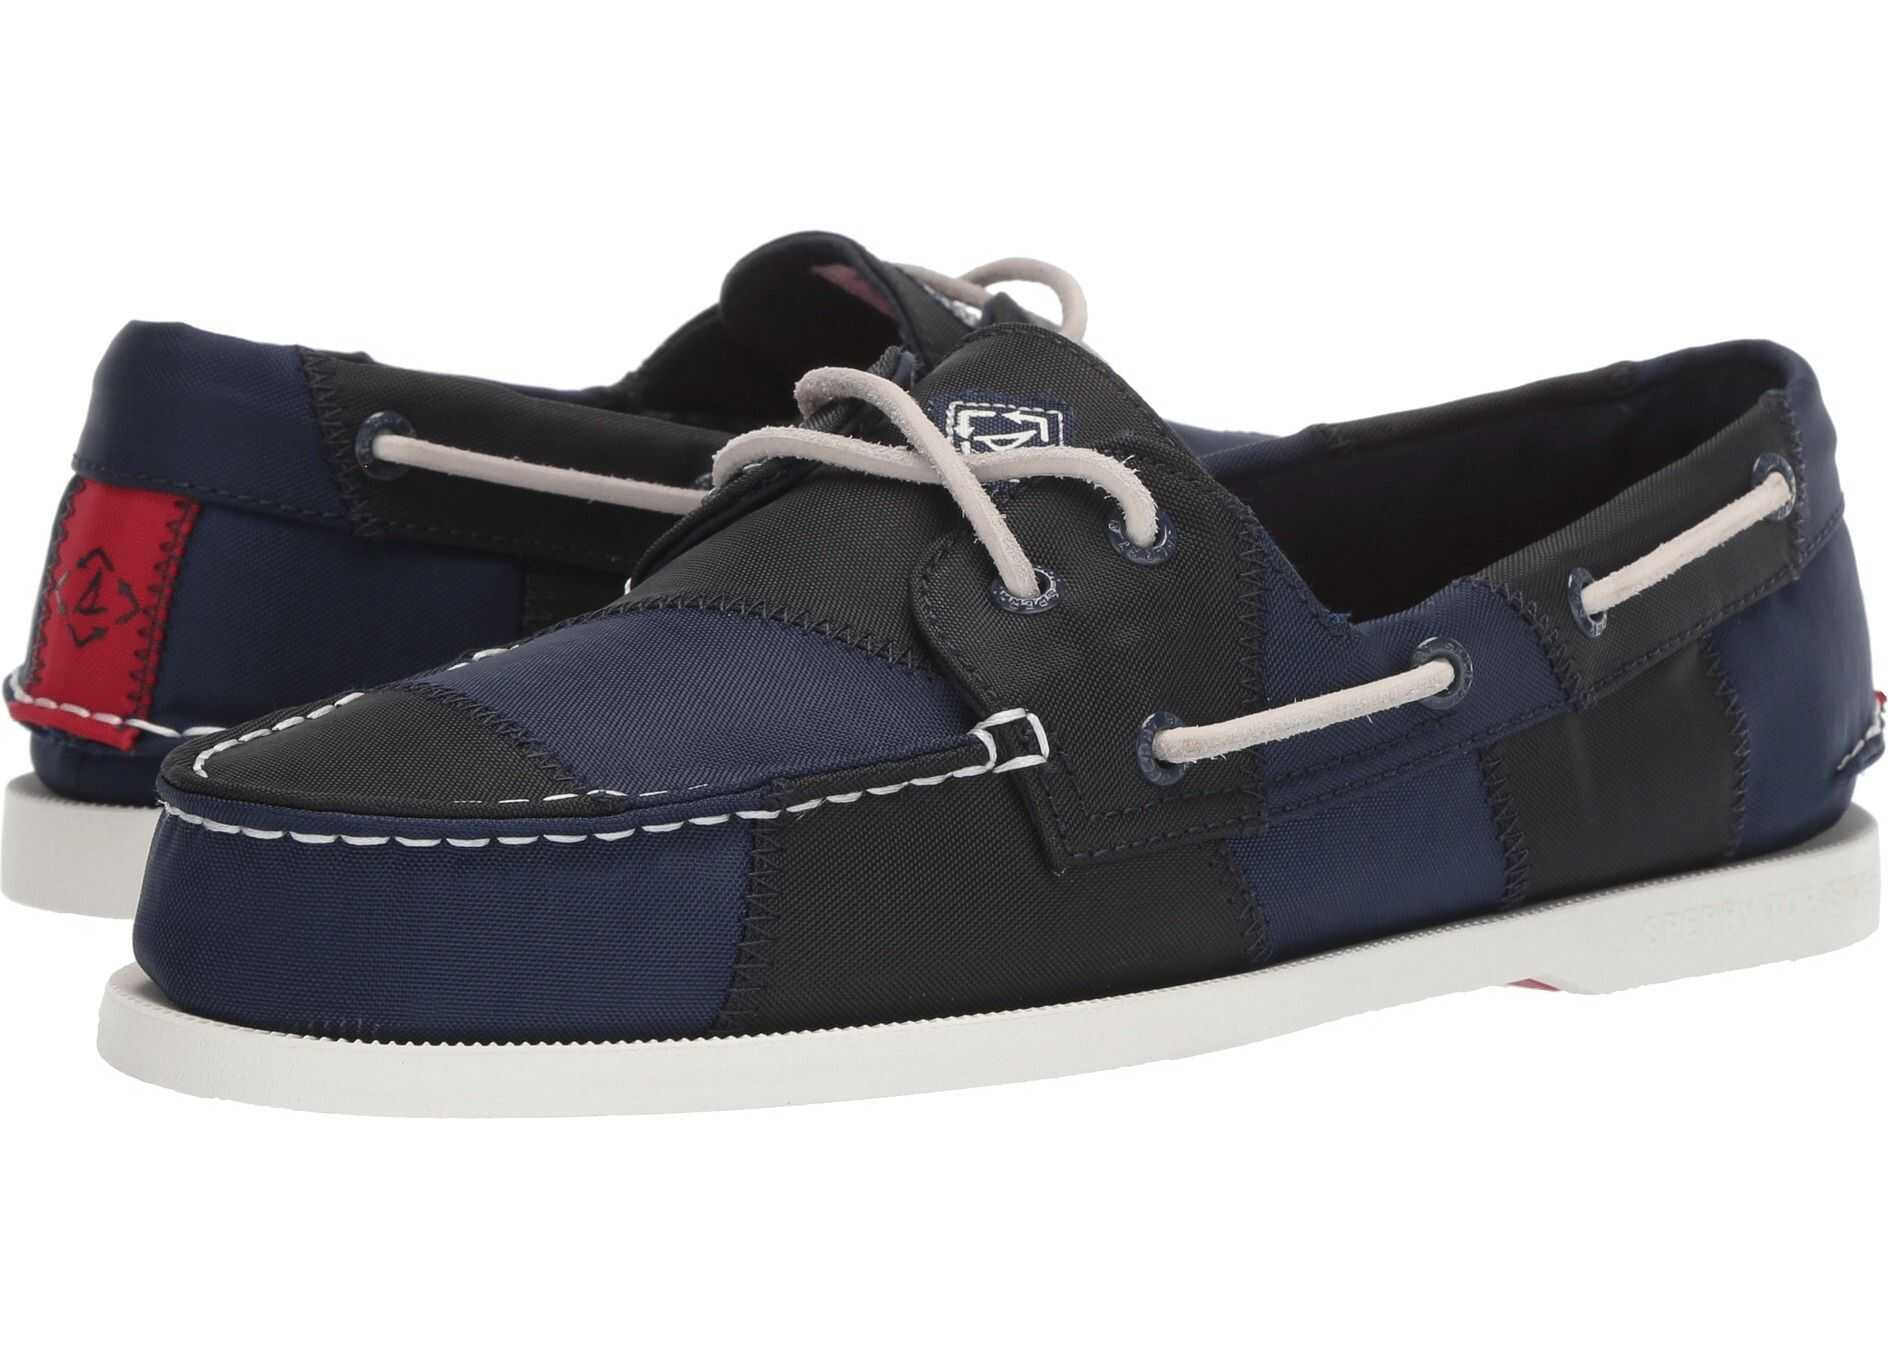 Sperry Top-Sider A/O 2-Eye Bionic Navy/Red/Green